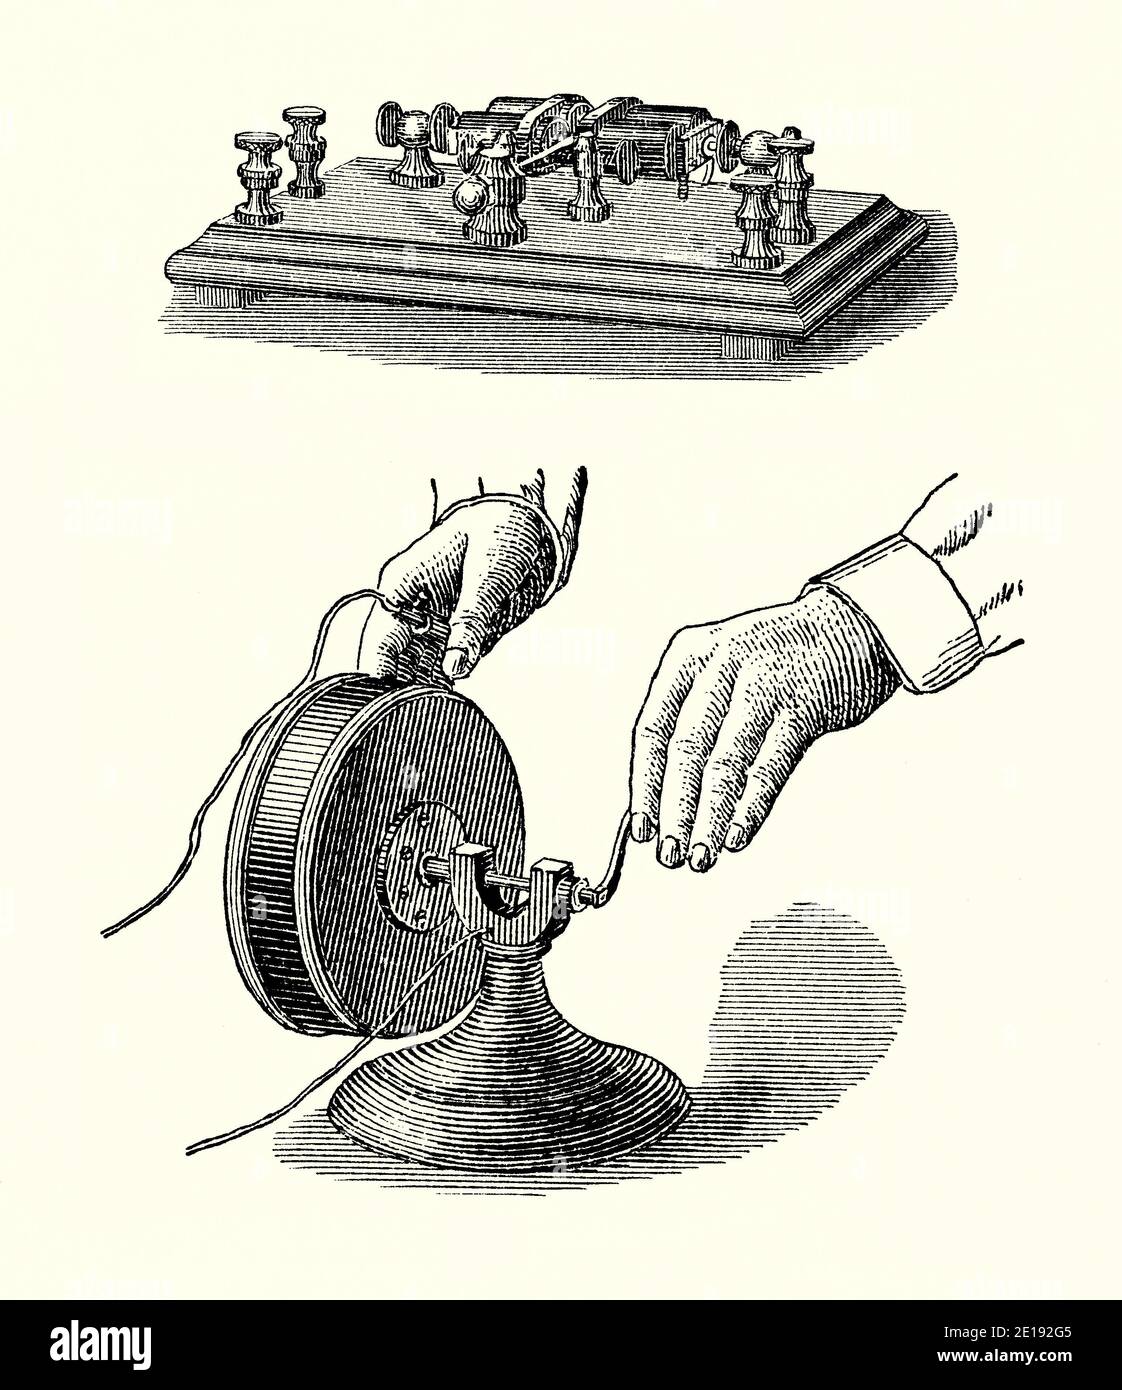 An old engraving of Gray’s telegraphic transmitter (top) and receiver (below). It is from a Victorian mechanical engineering book of the 1880s. Elisha Gray (1835 –1901) was an American electrical engineer who co-founded the Western Electric Manufacturing Company. Gray is best known for his development of a telephone prototype in 1876 in Highland Park, Illinois, USA. He also designed this composite tone device. The transmitter shows a single key connected to two electro-magnets. The receiver used a wooden soundbox covered in thin metal to reproduce sounds. Stock Photo